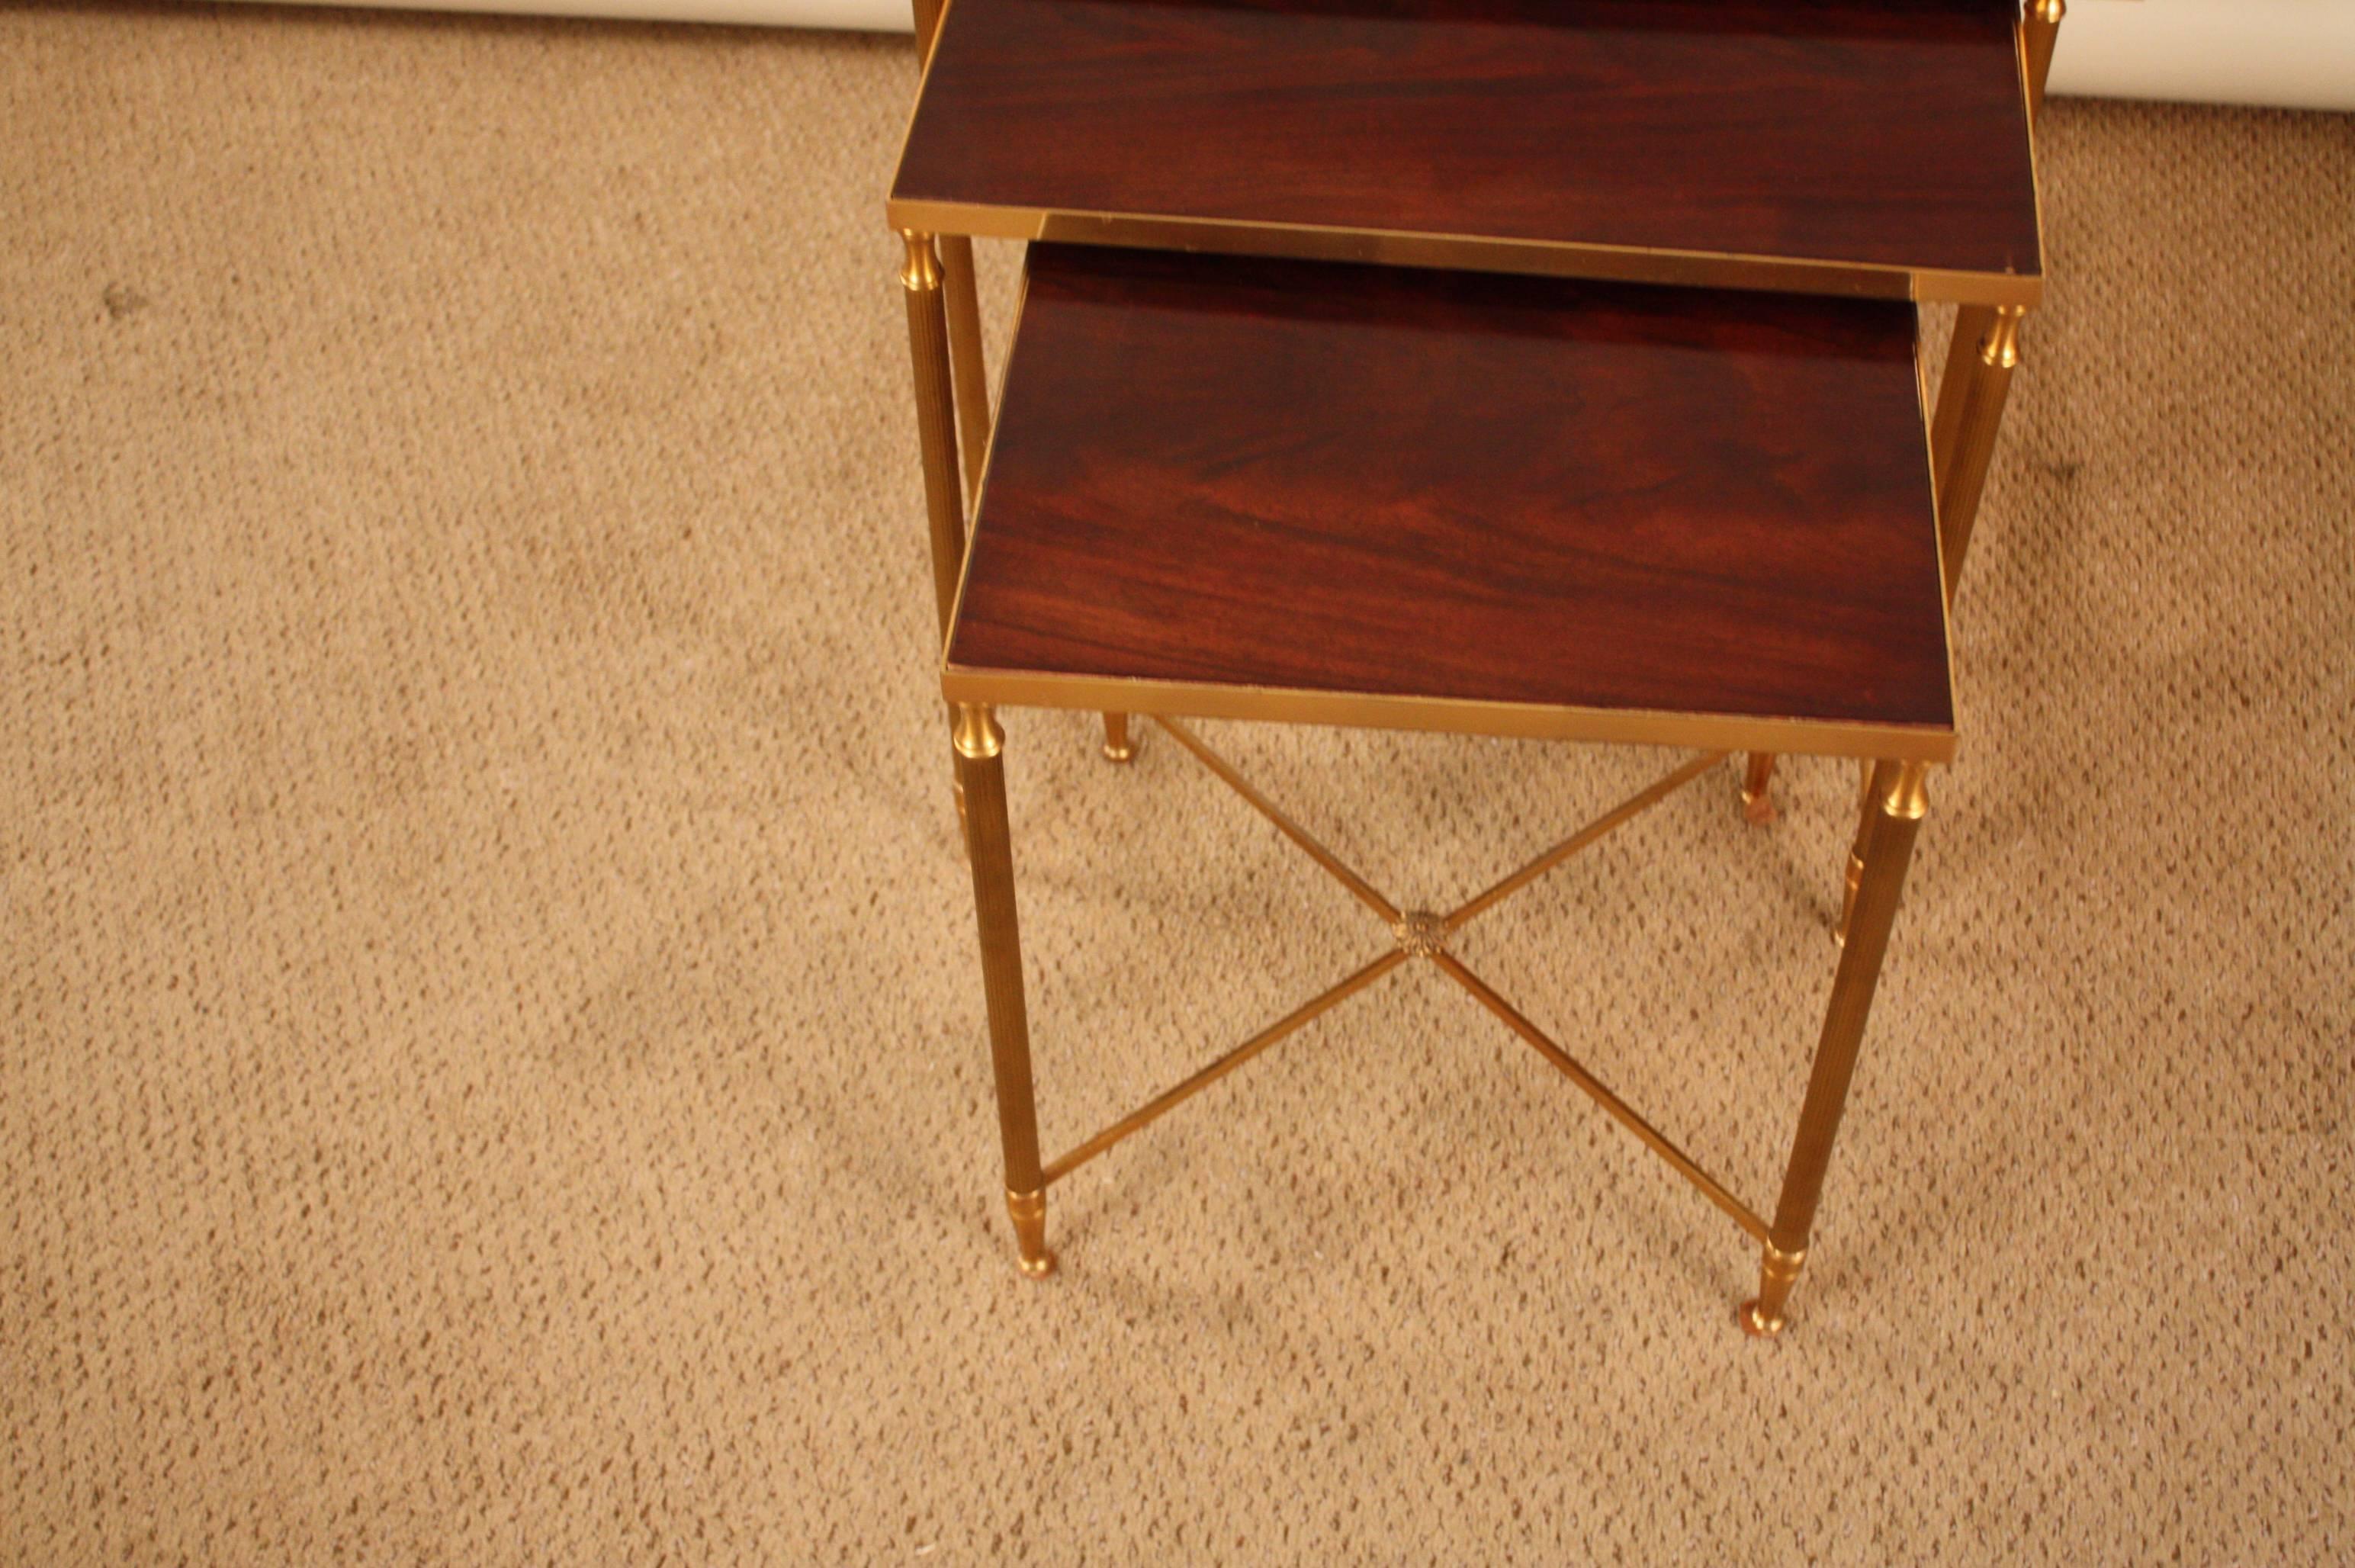 Simple but elegant set of three wood and bronze nesting tables.
Sizes:
Large 17